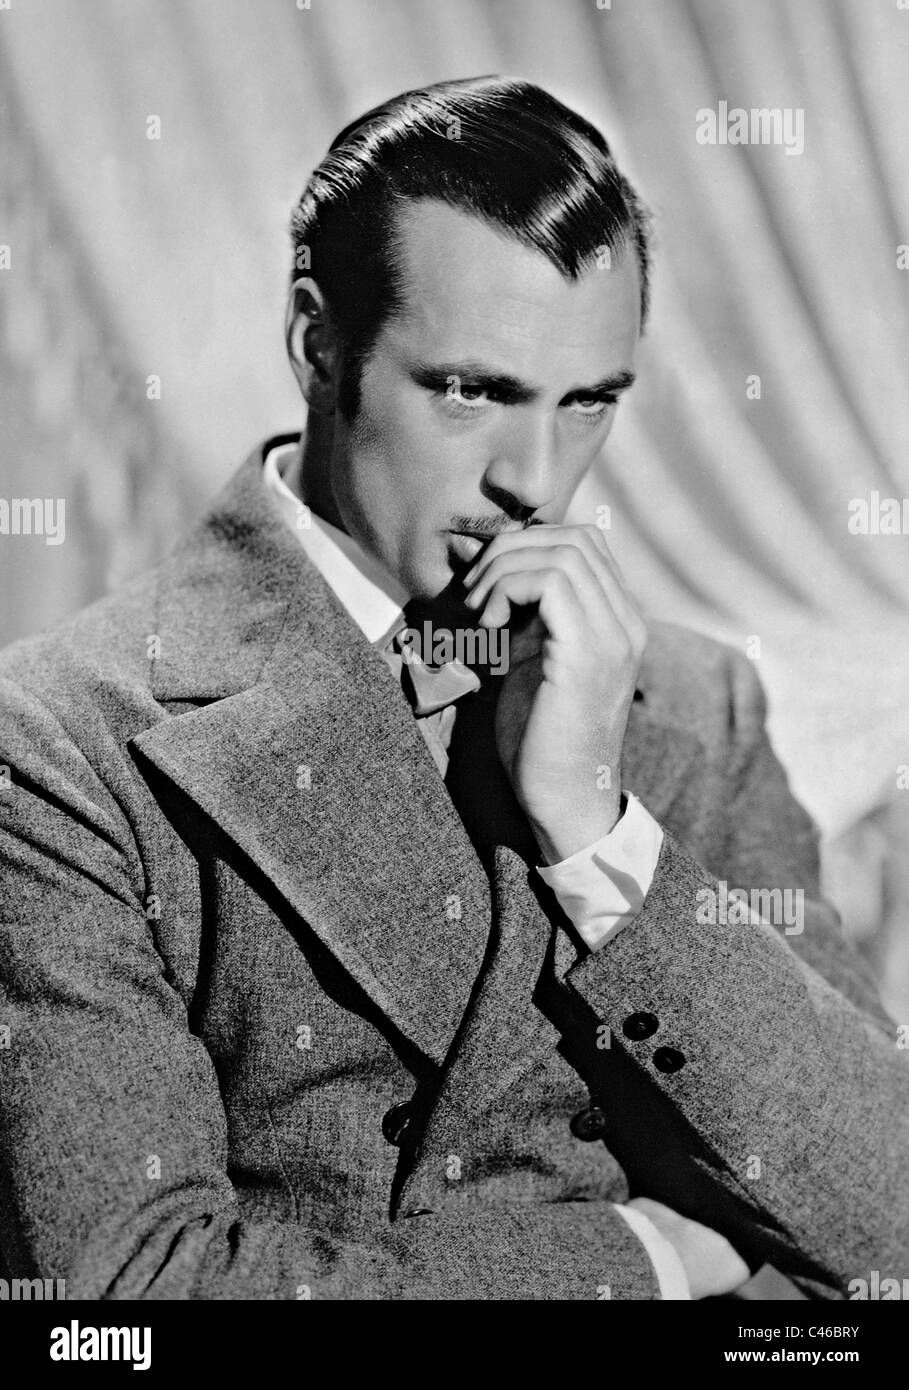 Gary Cooper in 'Peter Ibbetson', 1935 Stock Photo - Alamy